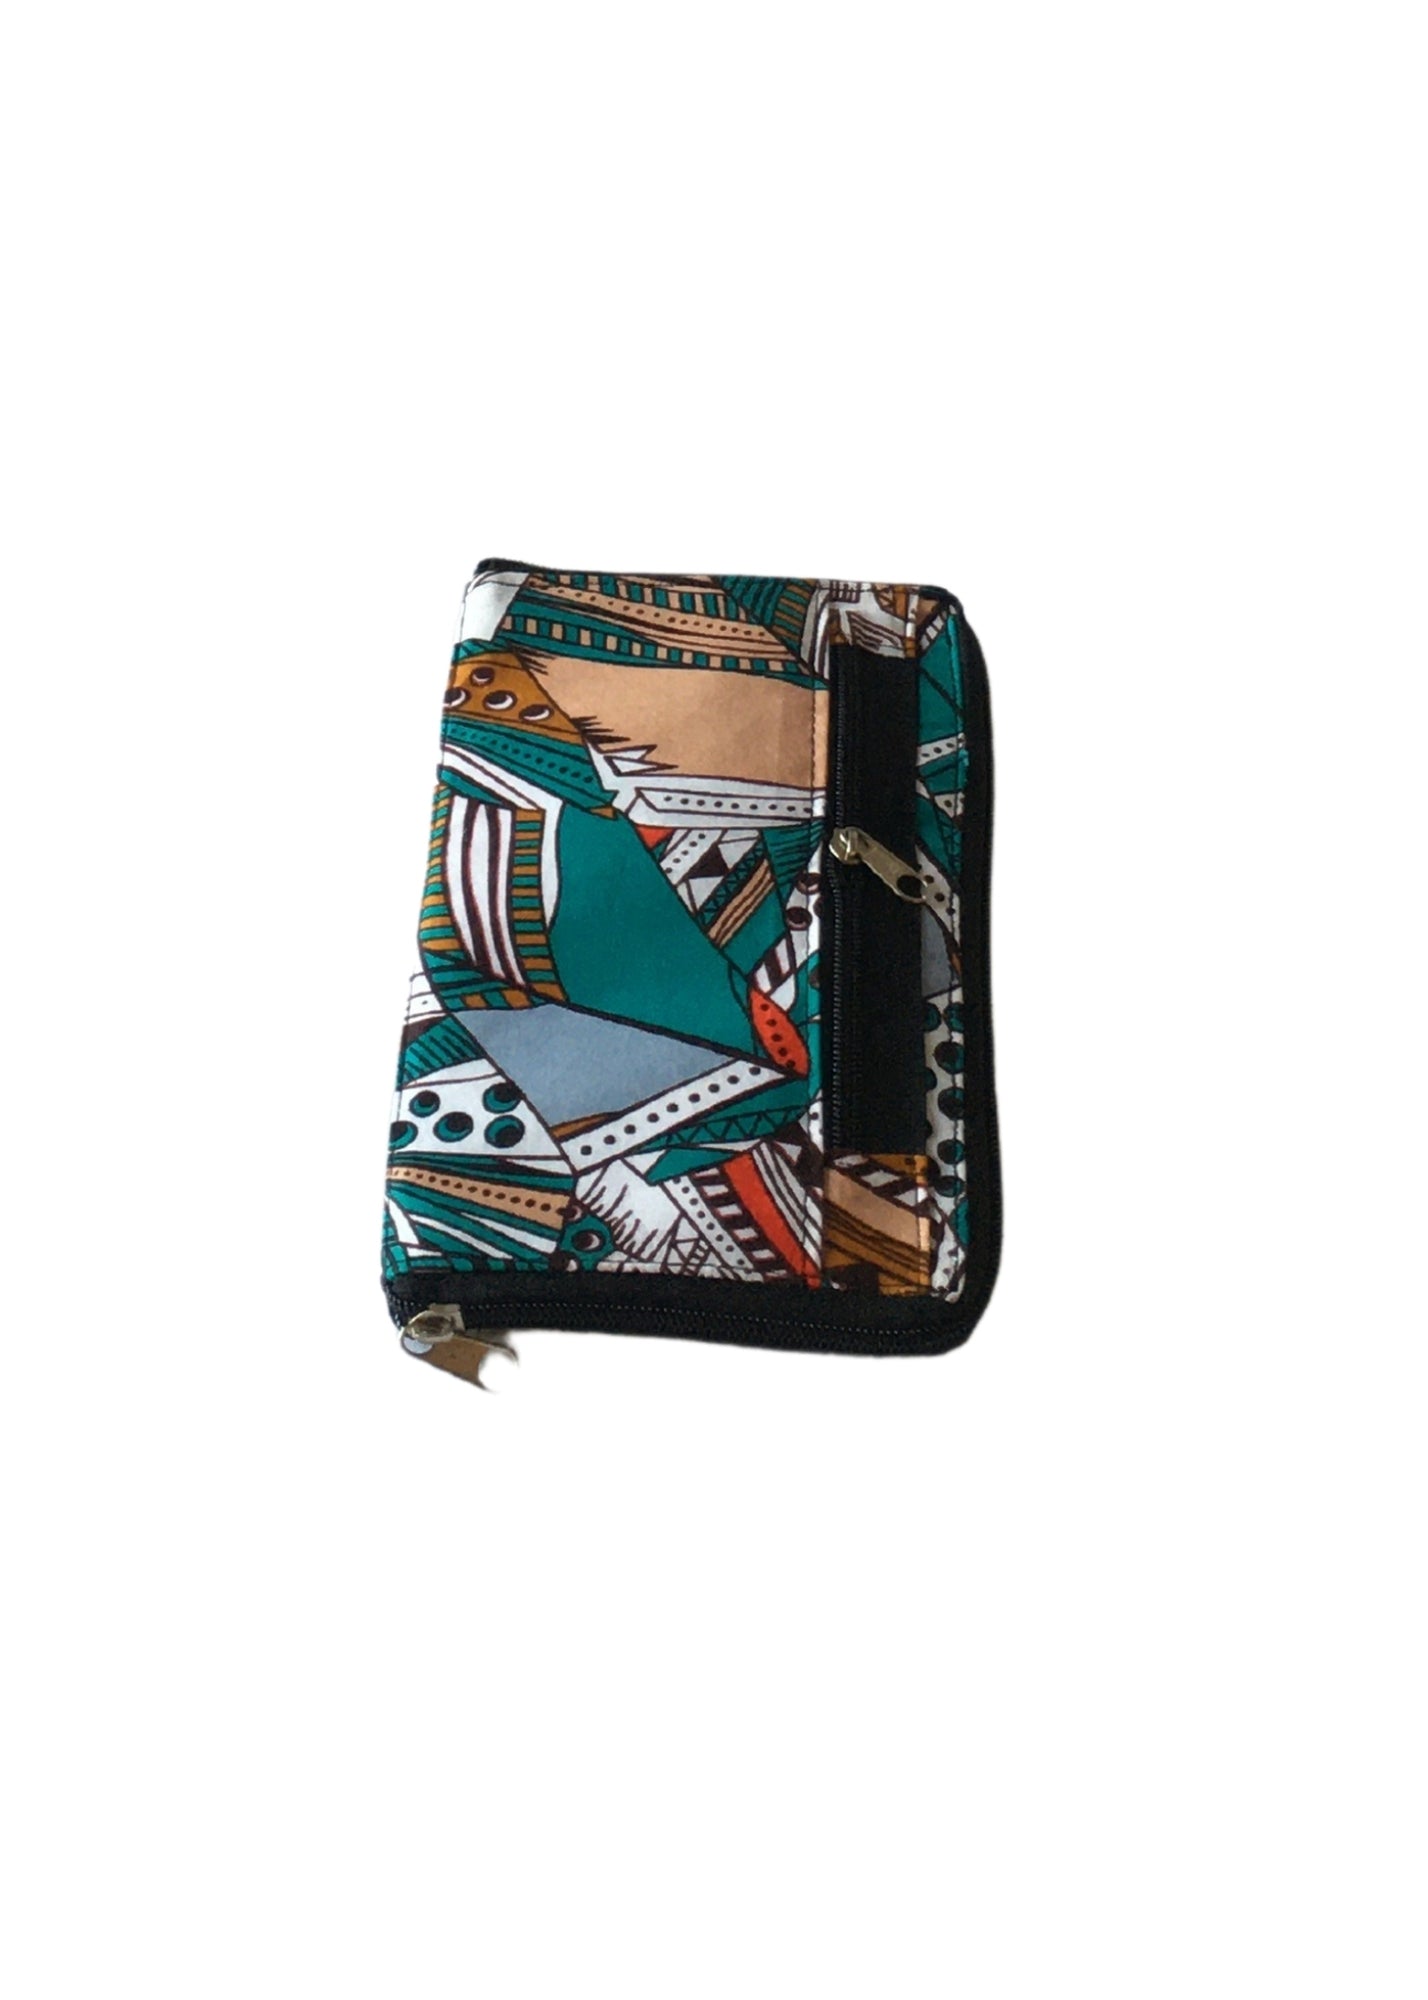 Foldable Tote Bag Green -Contemporary and Colorful Ensemble-African apparel and accessories